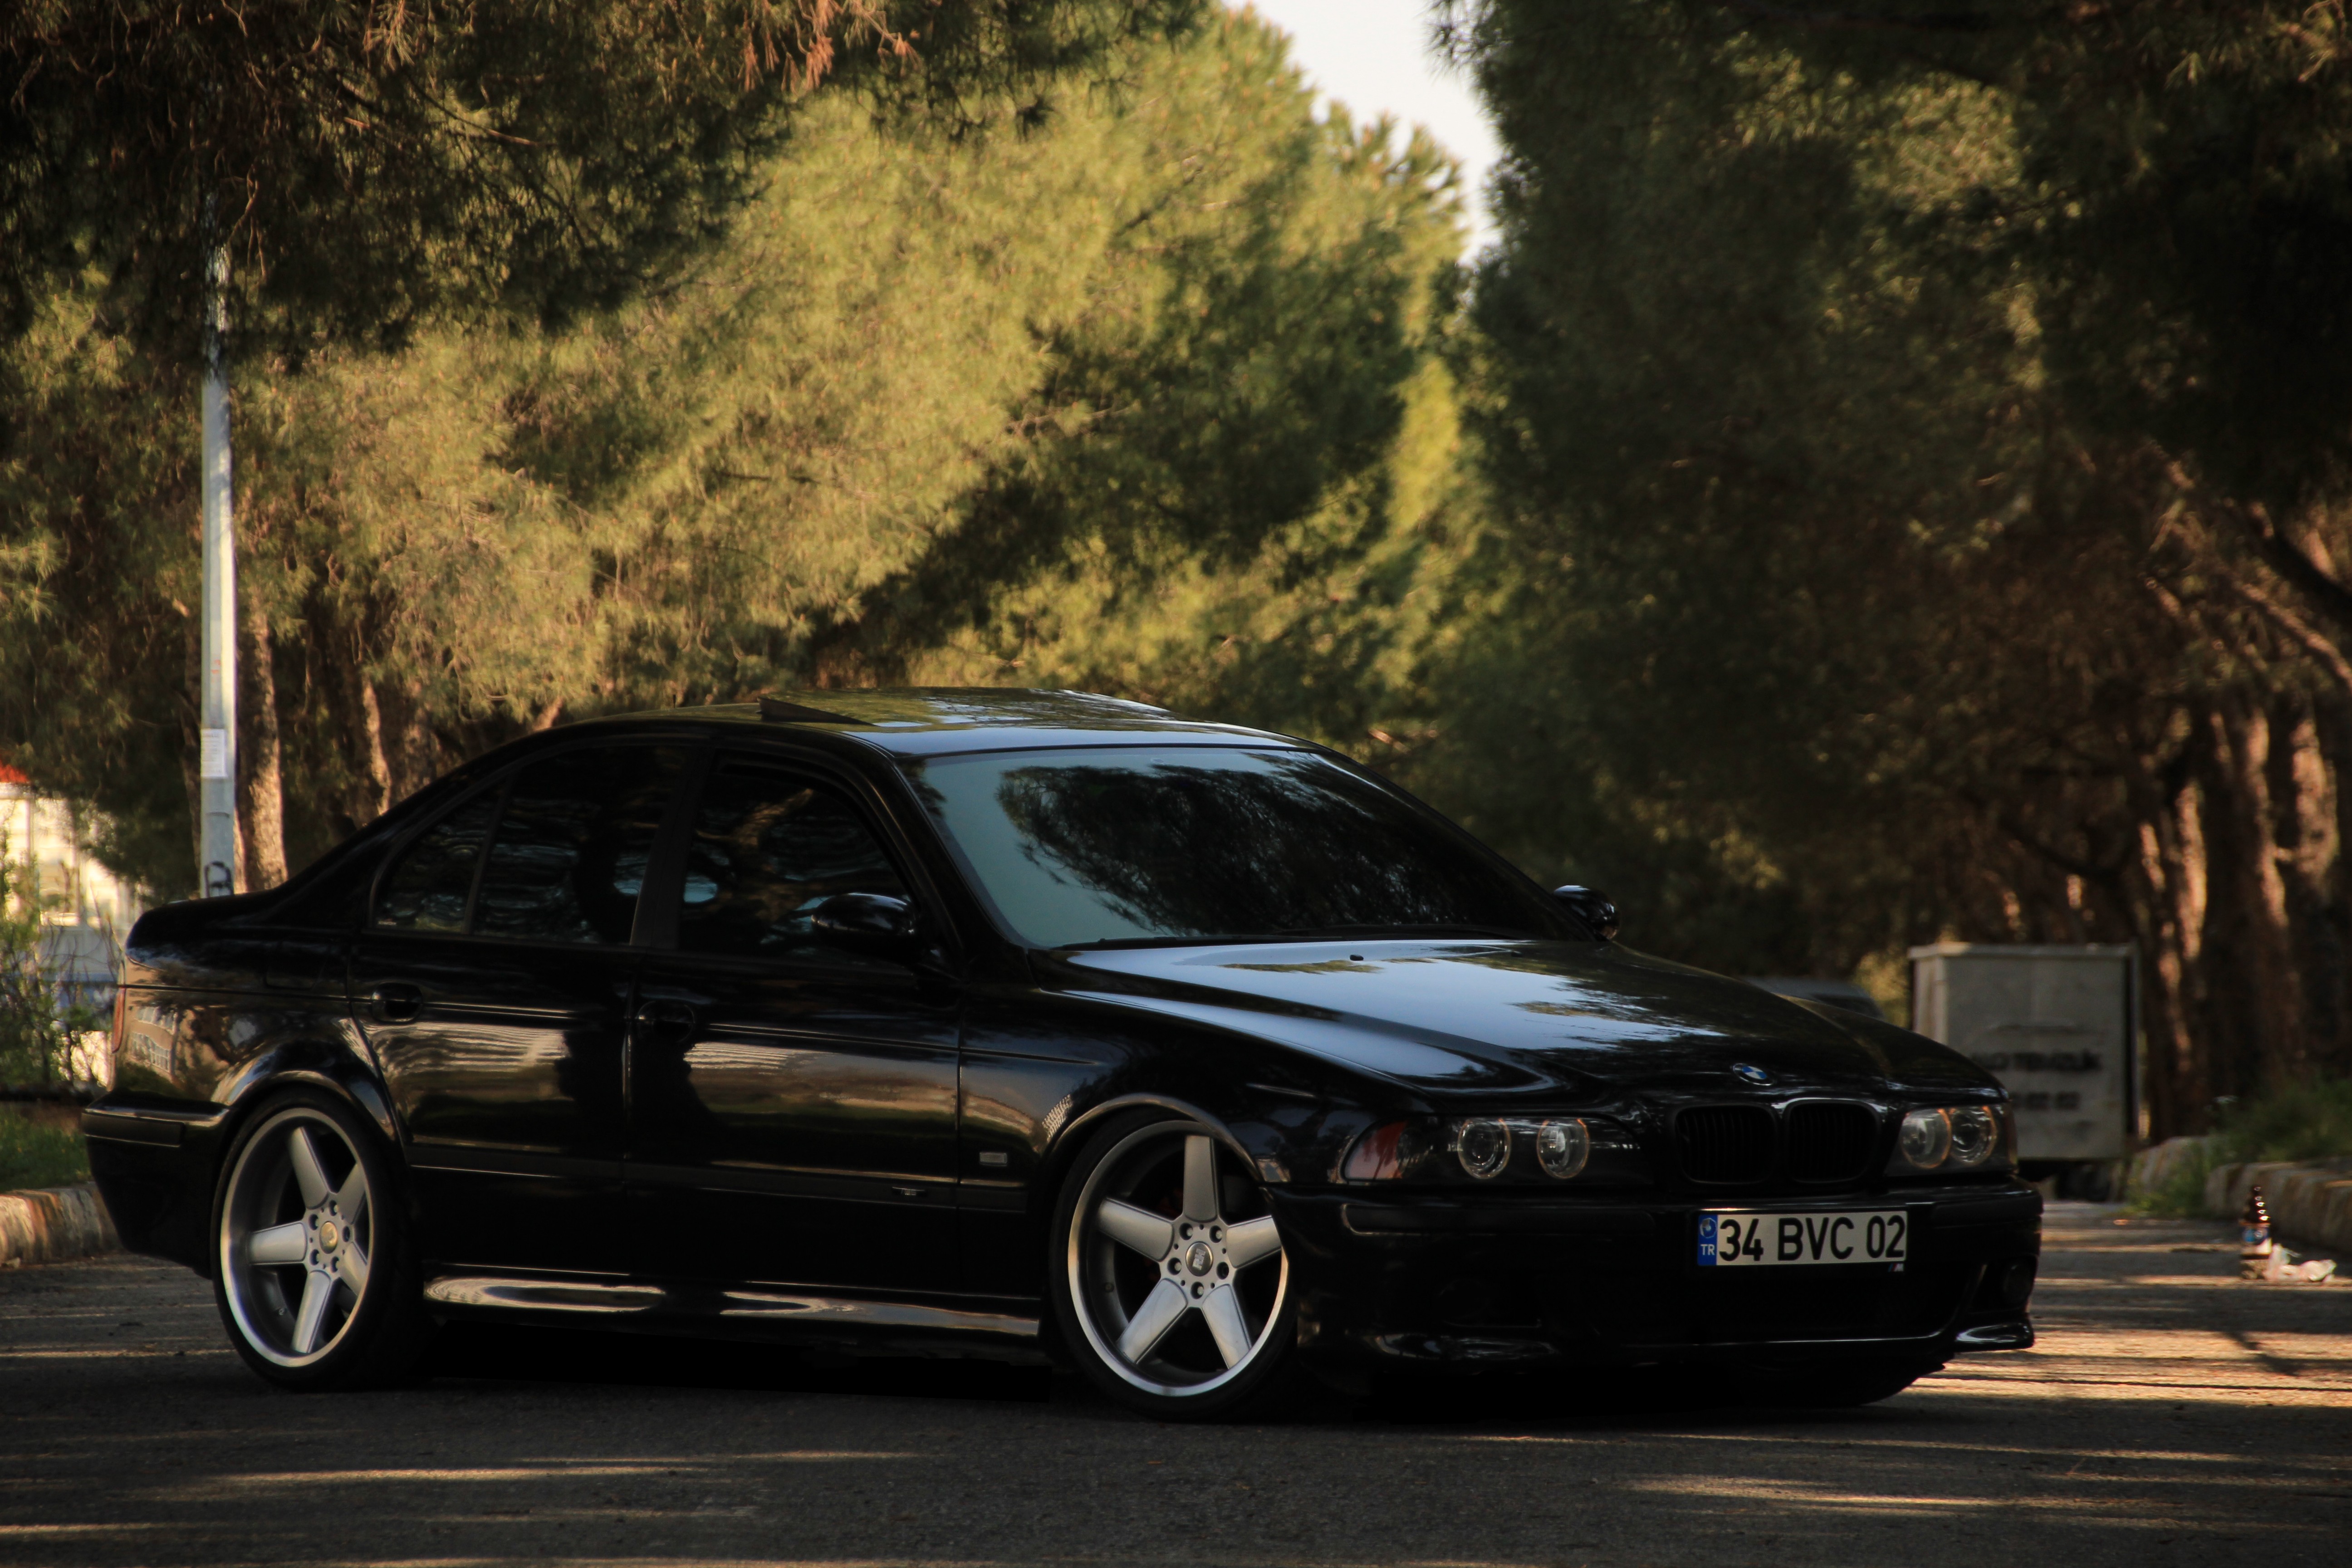 Black car BMW M5 E39 wallpapers and images - wallpapers ...
 Bmw M5 Black 2013 Wallpaper